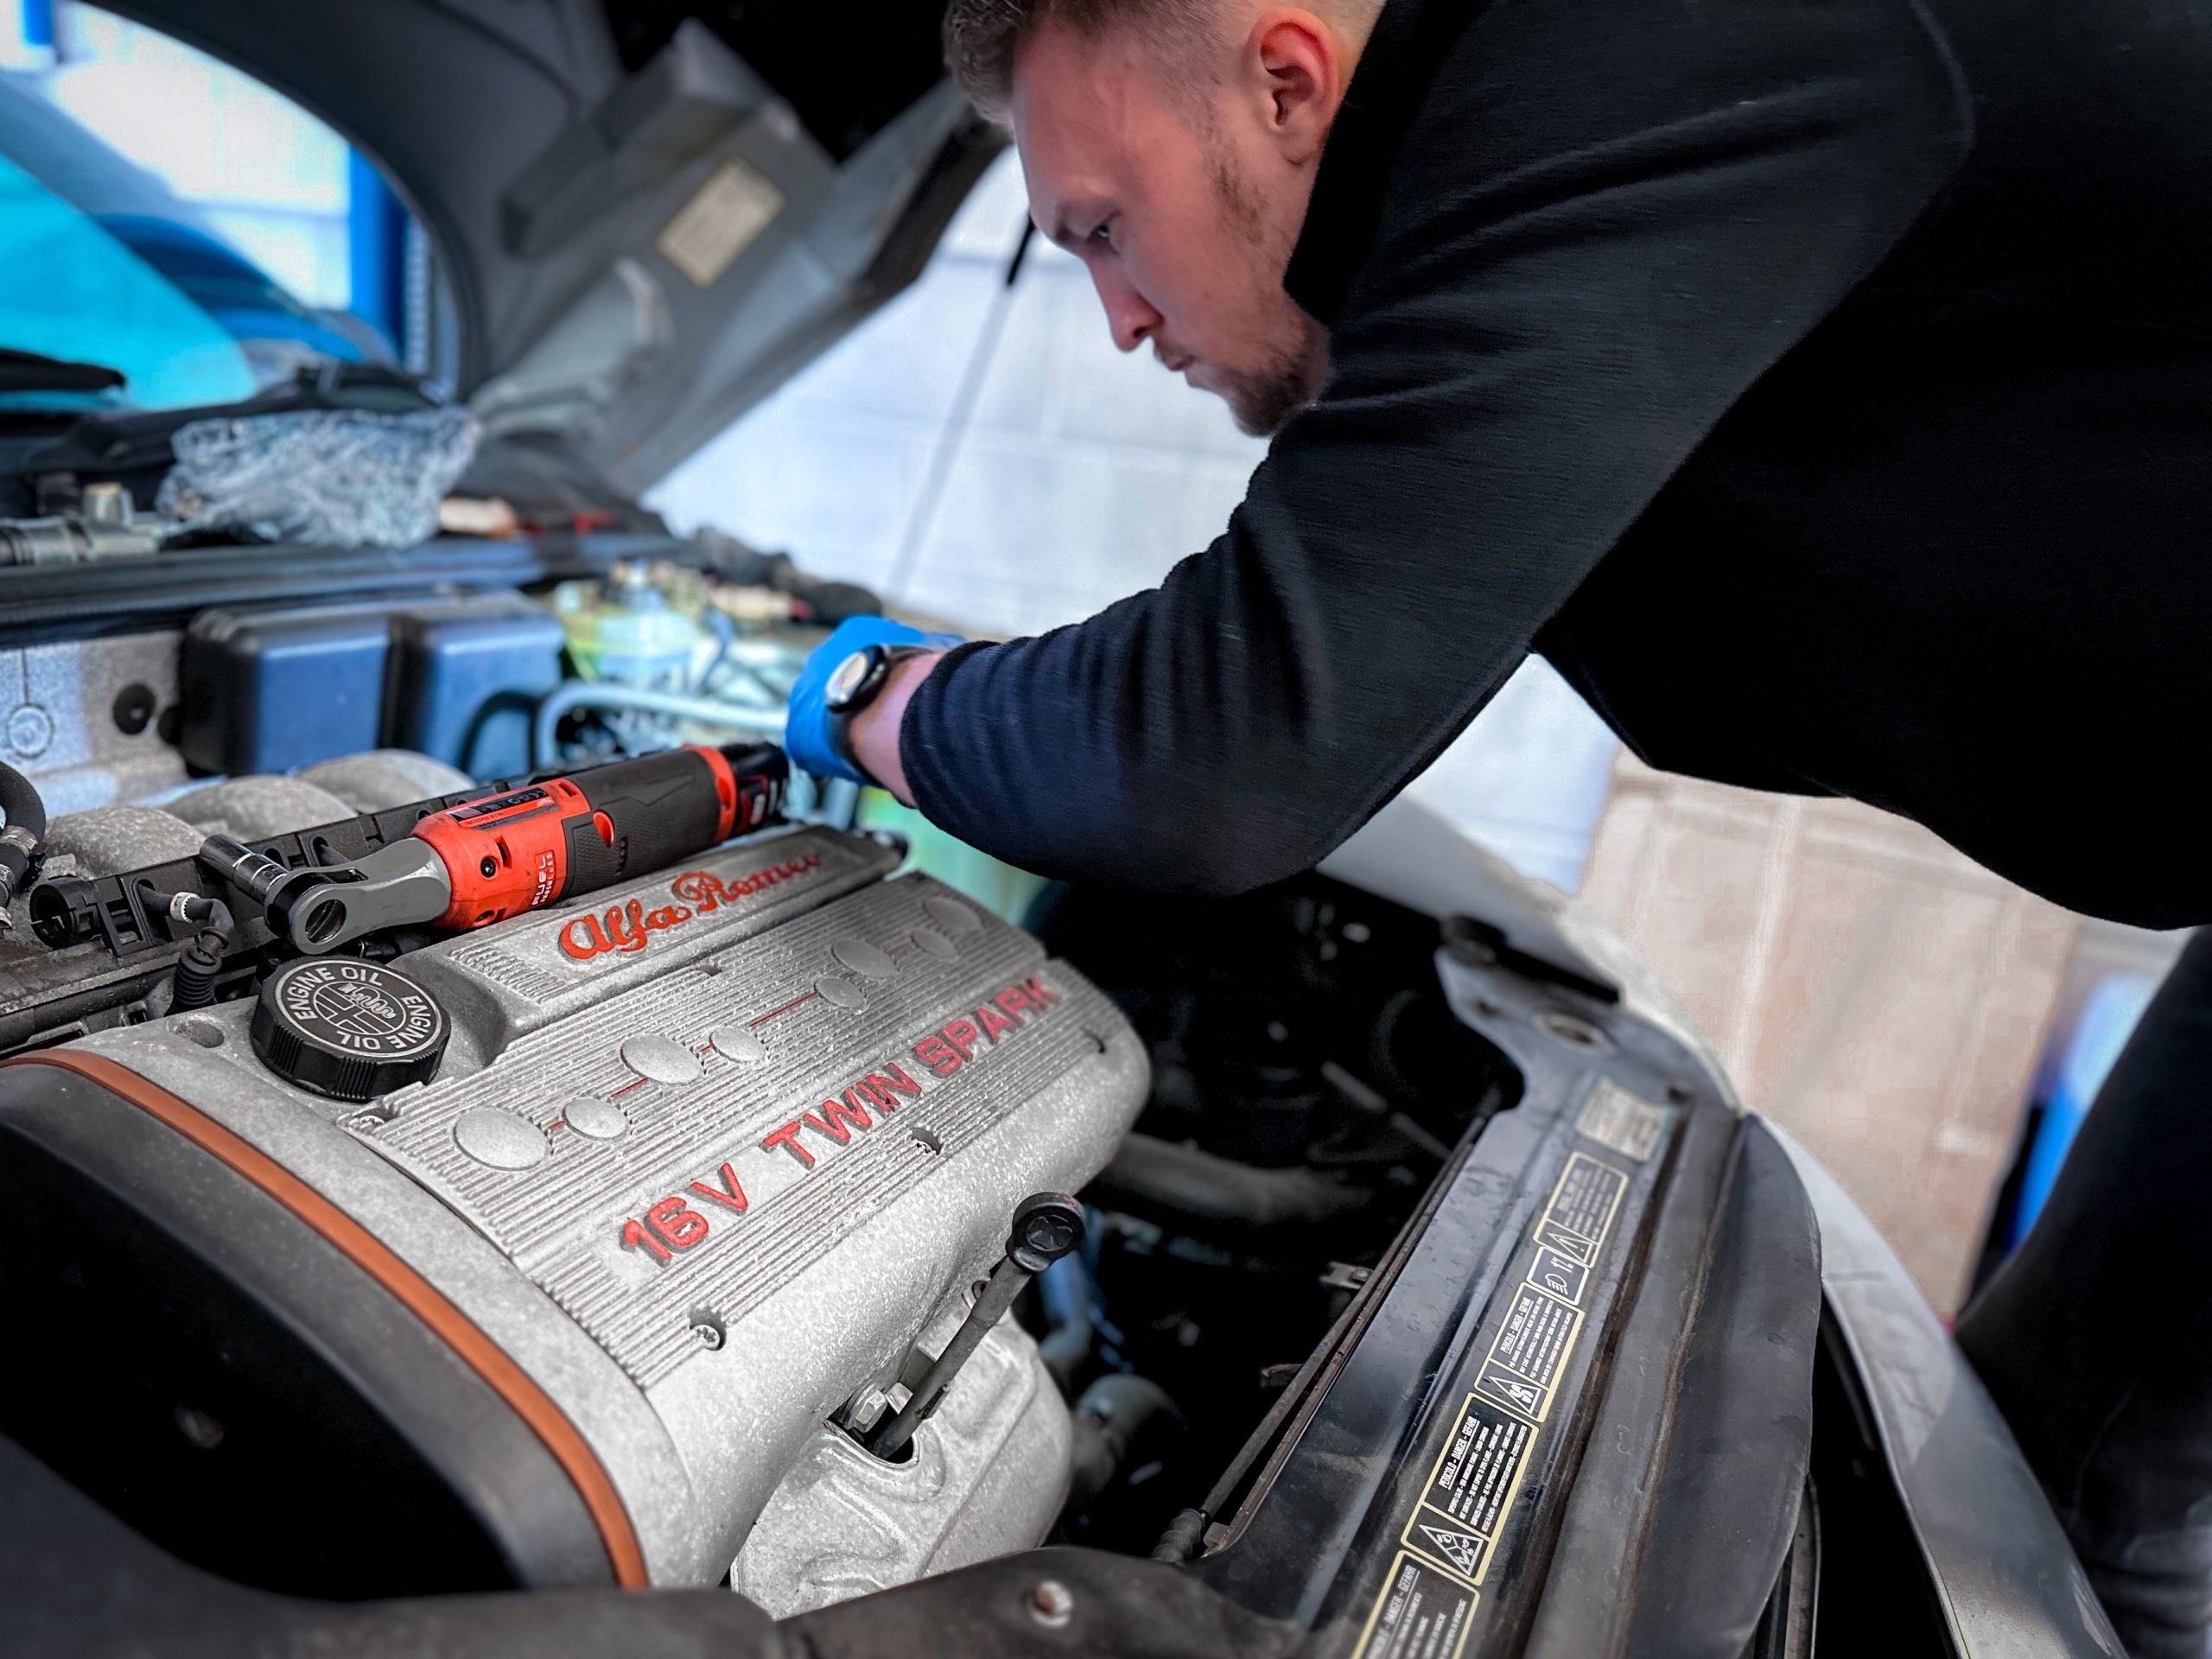 A mechanic is servicing a car in North Walsham, focusing intently on the engine compartment. They are wearing a black long-sleeve top and are in the process of working on an Alfa Romeo 16V Twin Spark engine. A black and orange cordless drill, along with various tools, is laid out on the engine cover, indicating an ongoing maintenance task. The bonnet is open, revealing the intricate components of the engine bay.